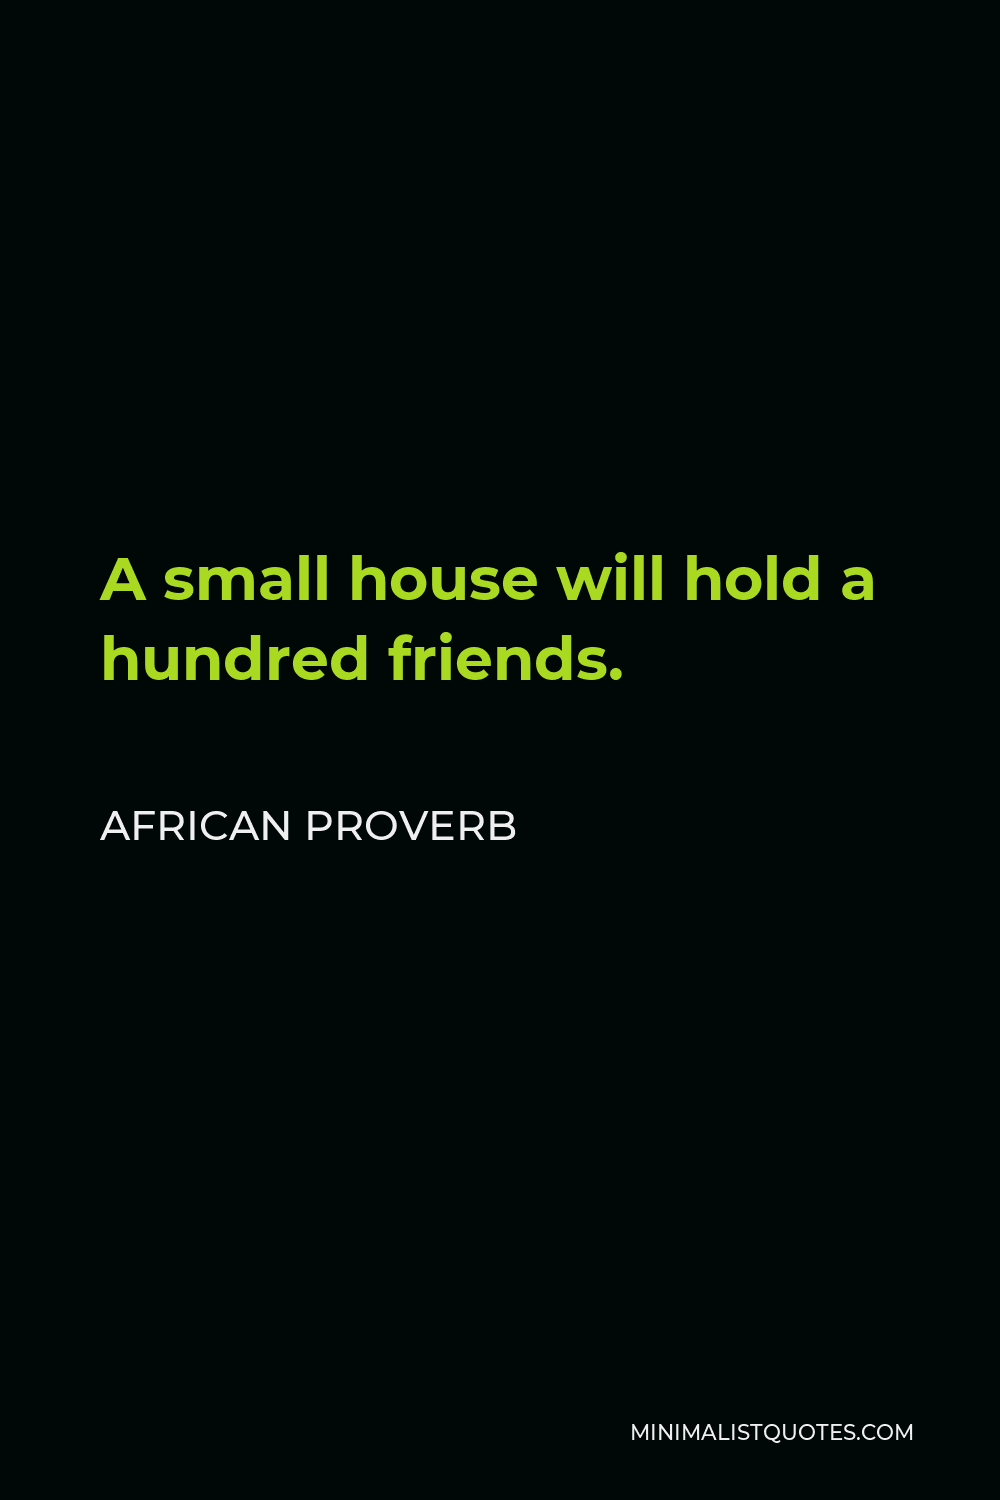 African Proverb Quote - A small house will hold a hundred friends.